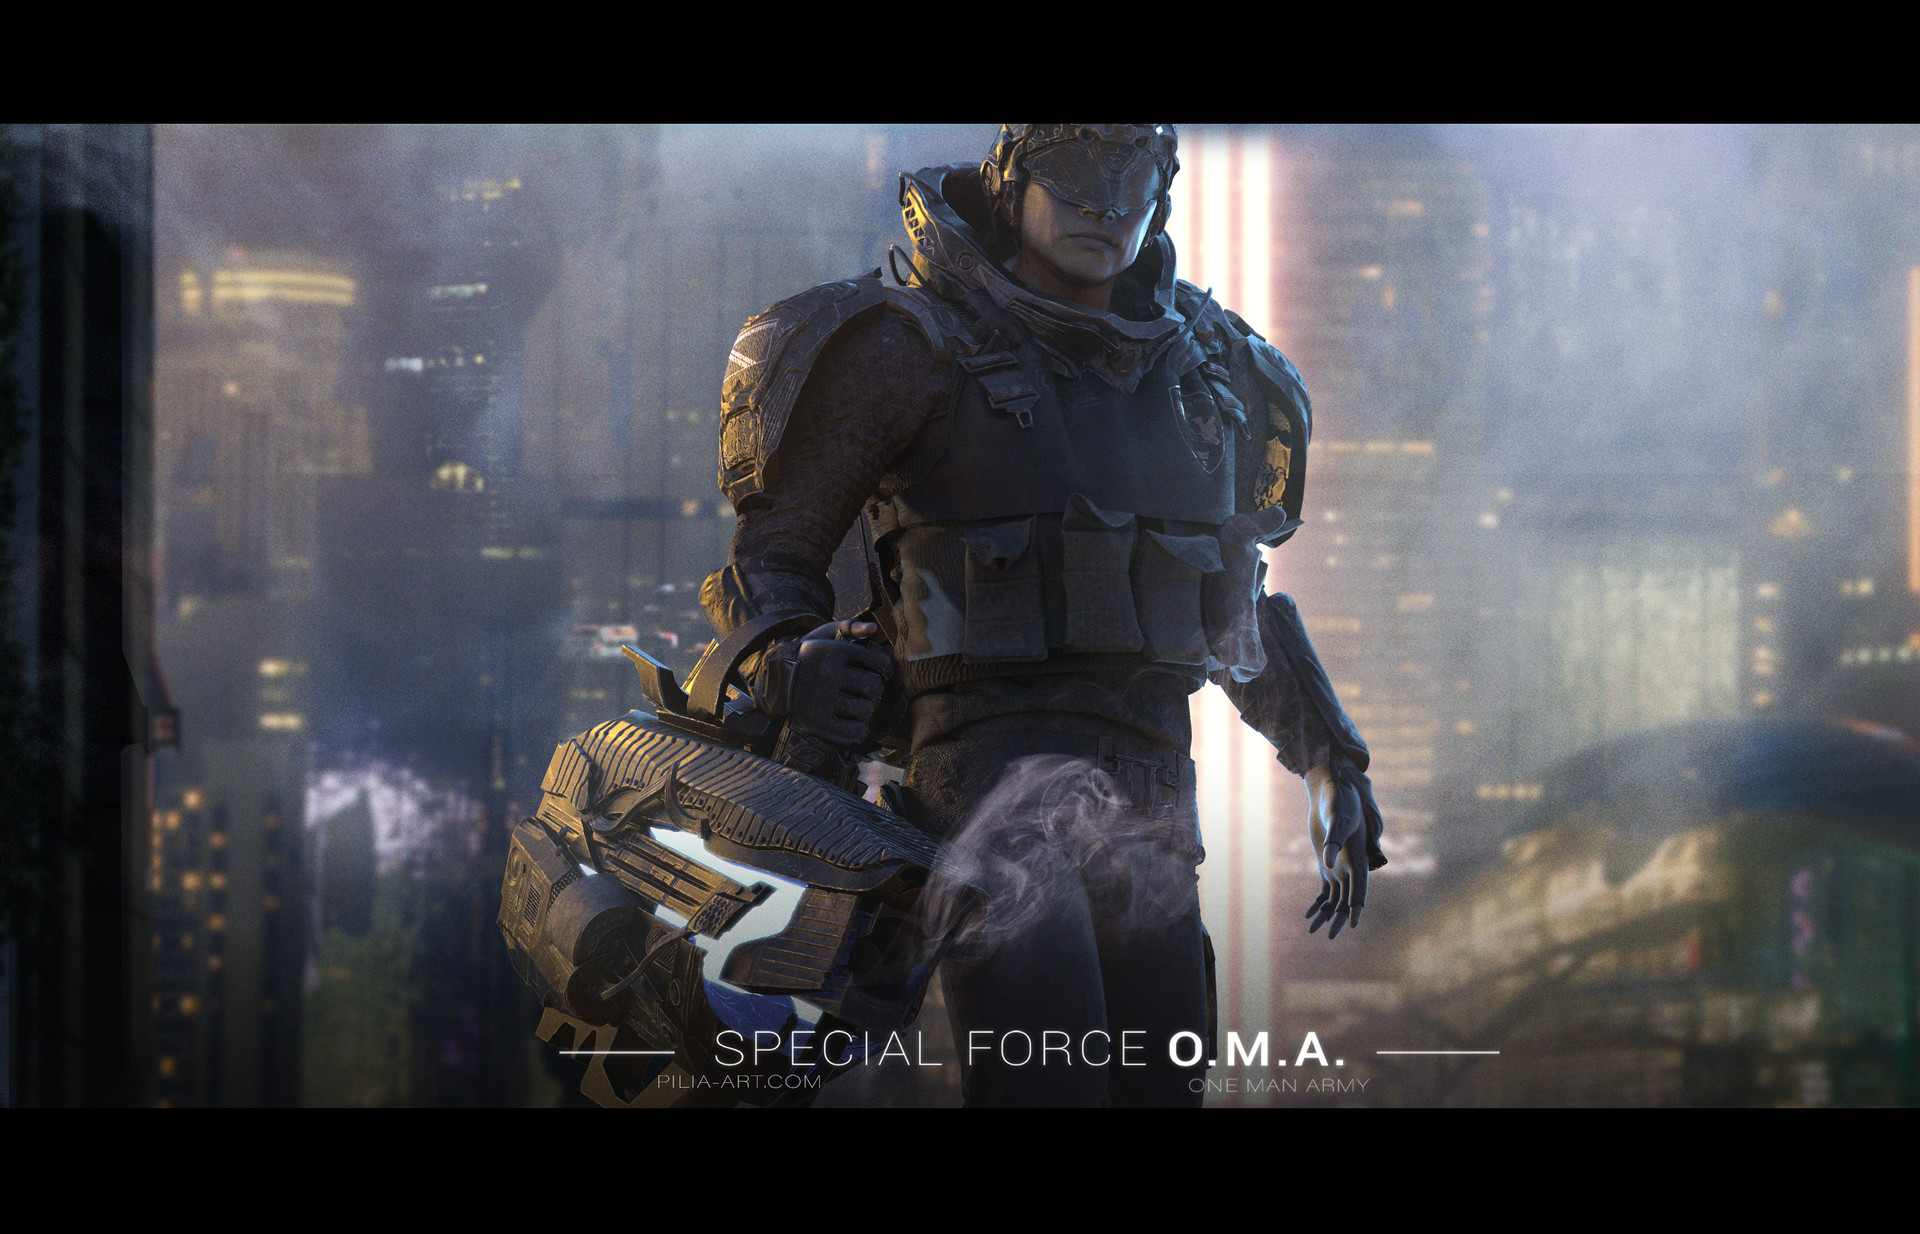 Special Force O.M.A. 02